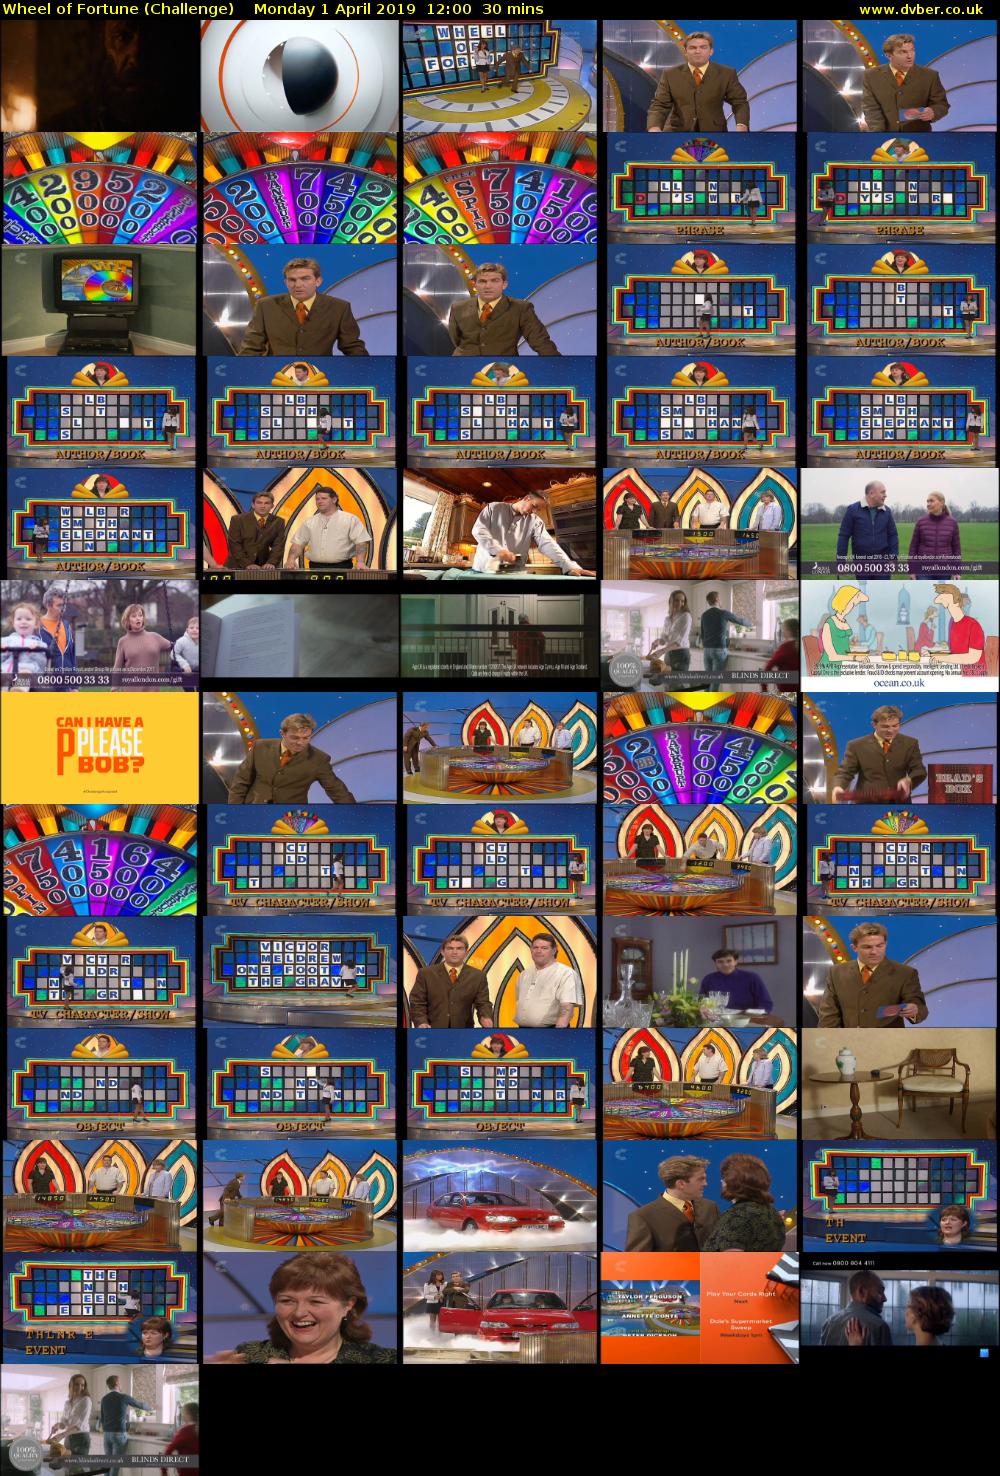 Wheel of Fortune (Challenge) Monday 1 April 2019 12:00 - 12:30